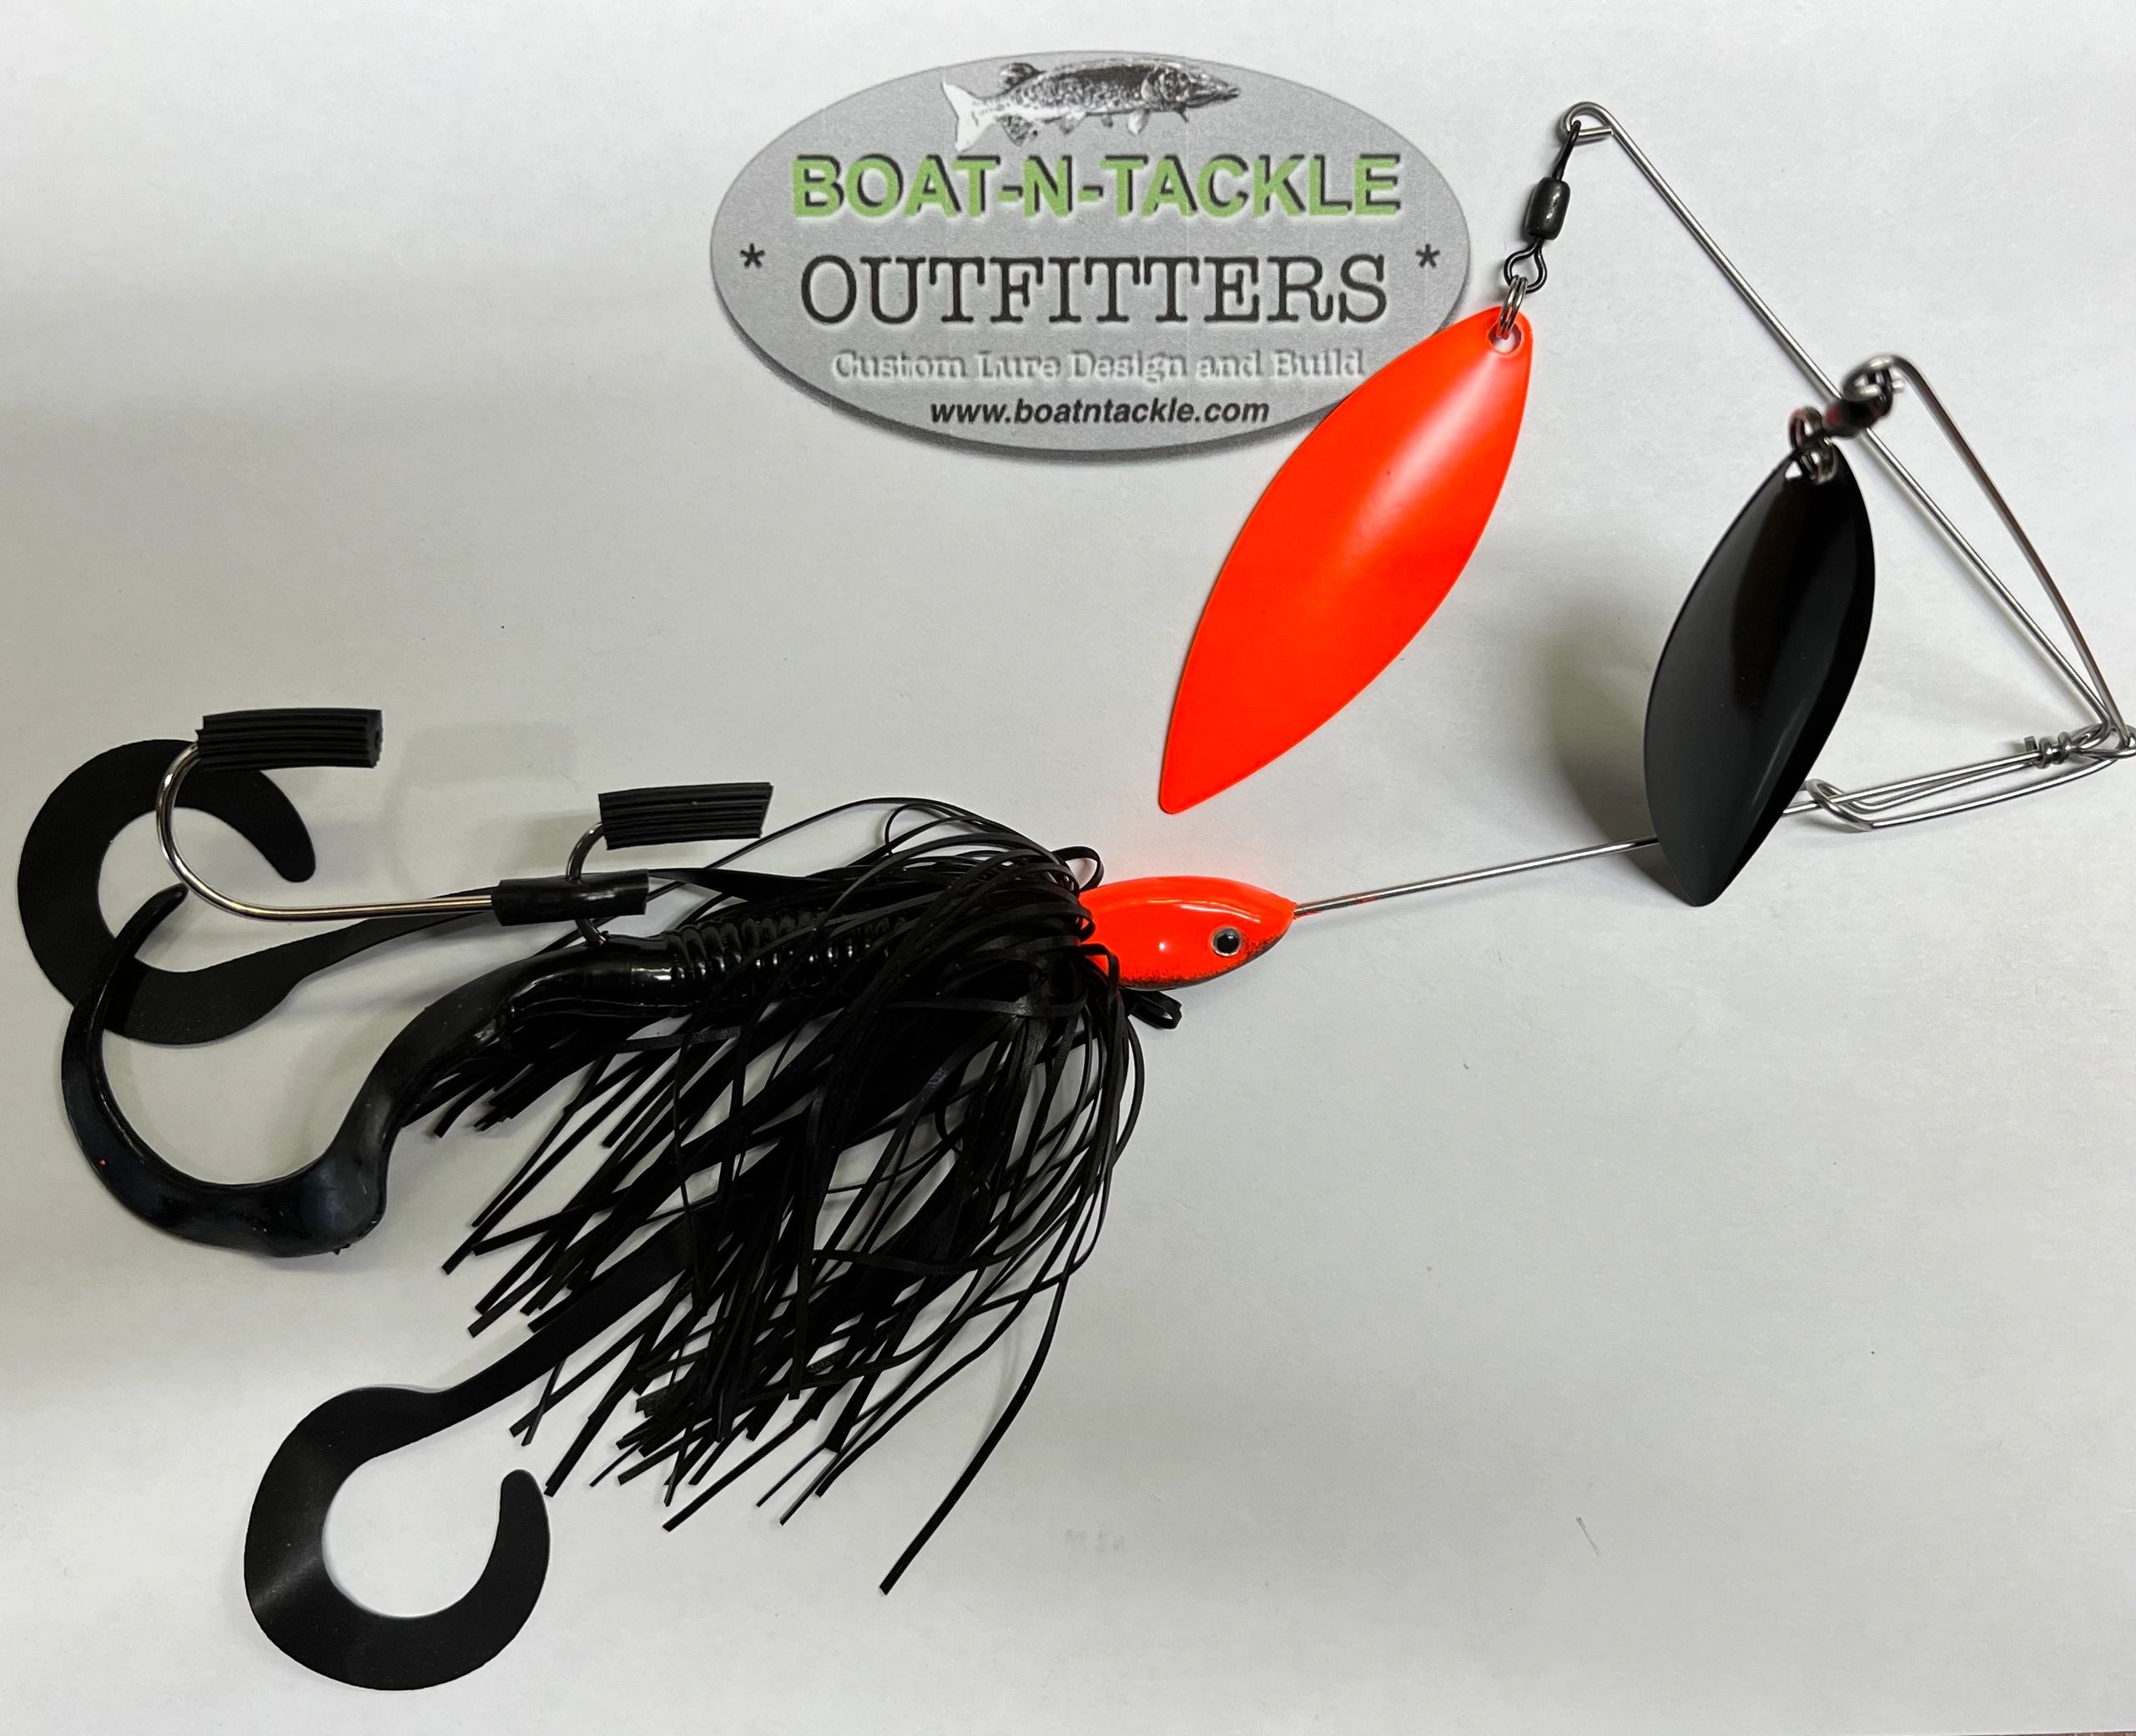 Shop the Best Fishing Lures at Boat-N-Tackle Outfitters